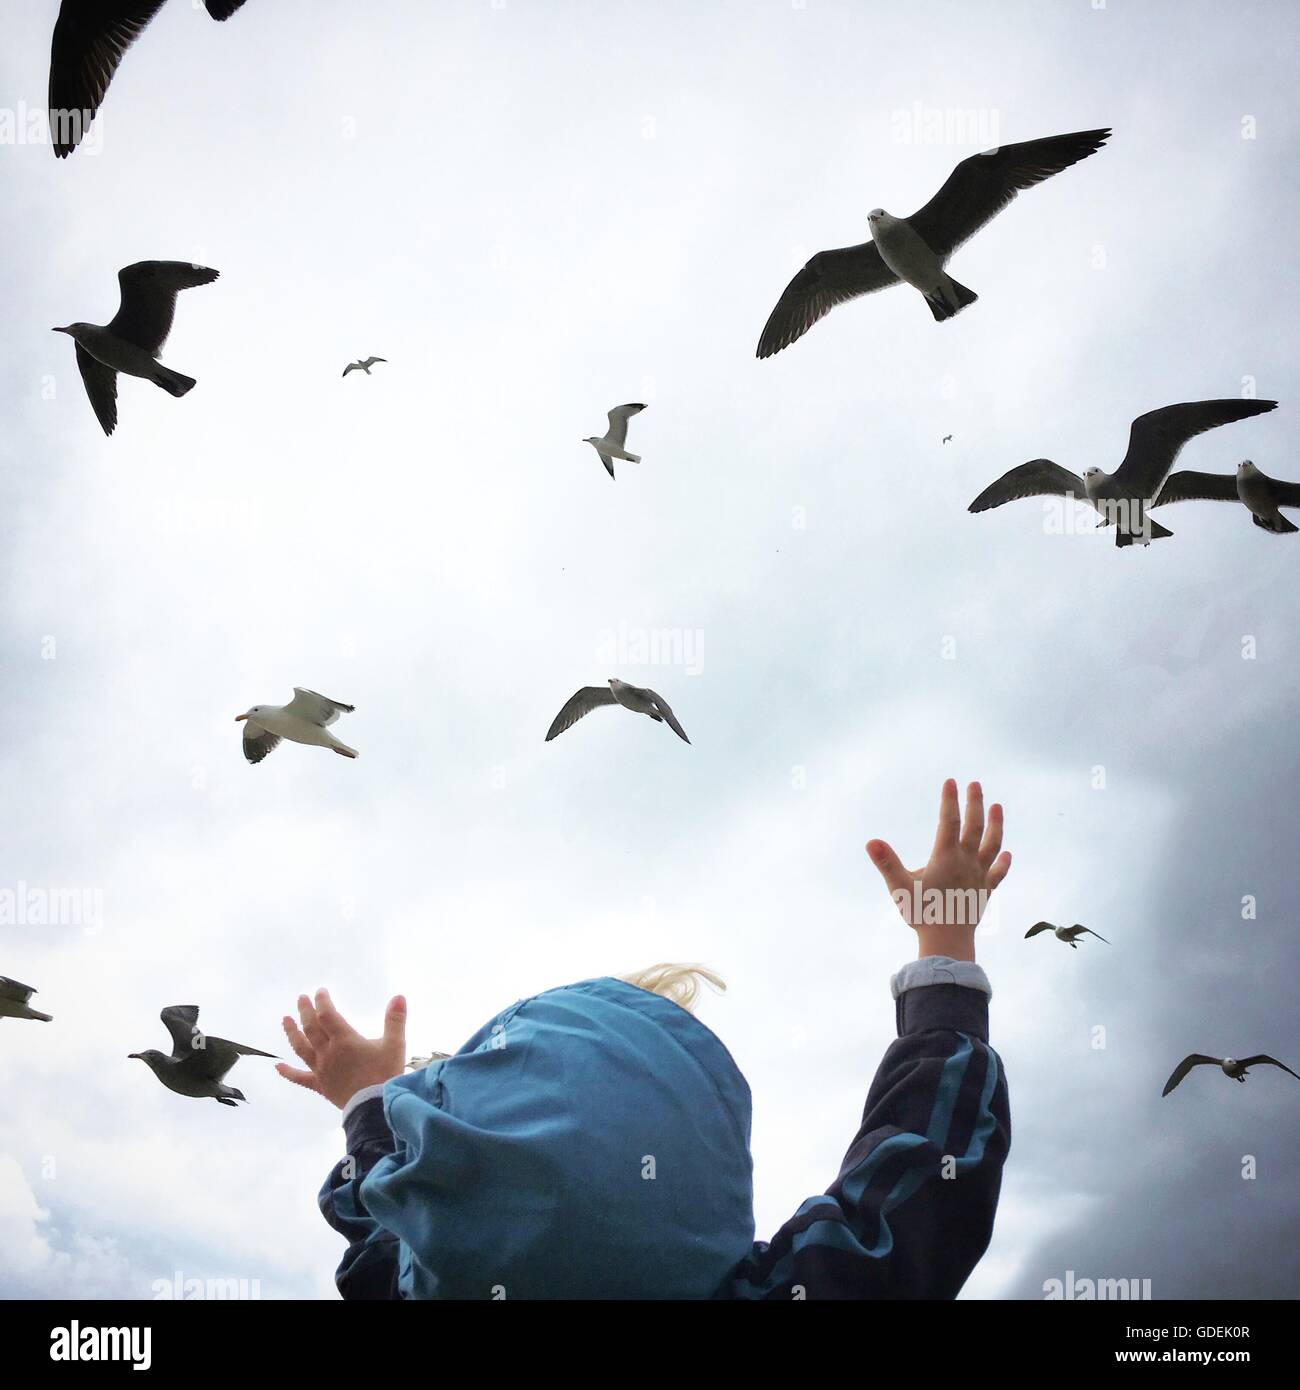 Boy with arms outstretched reaching for birds Stock Photo